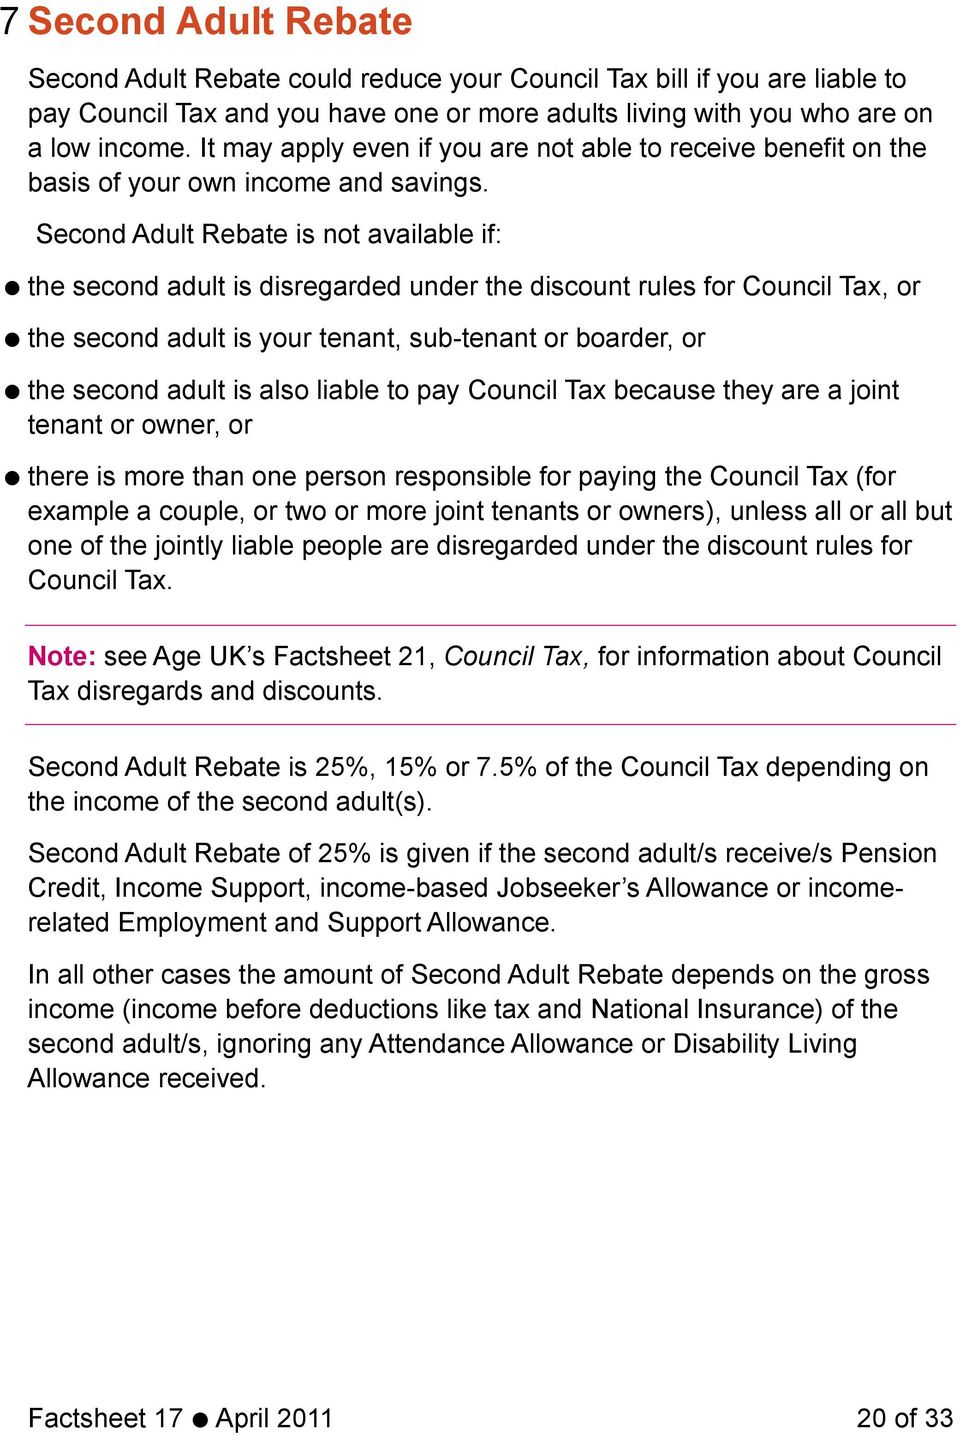 Second Adult Rebate is not available if: the second adult is disregarded under the discount rules for Council Tax, or the second adult is your tenant, sub-tenant or boarder, or the second adult is